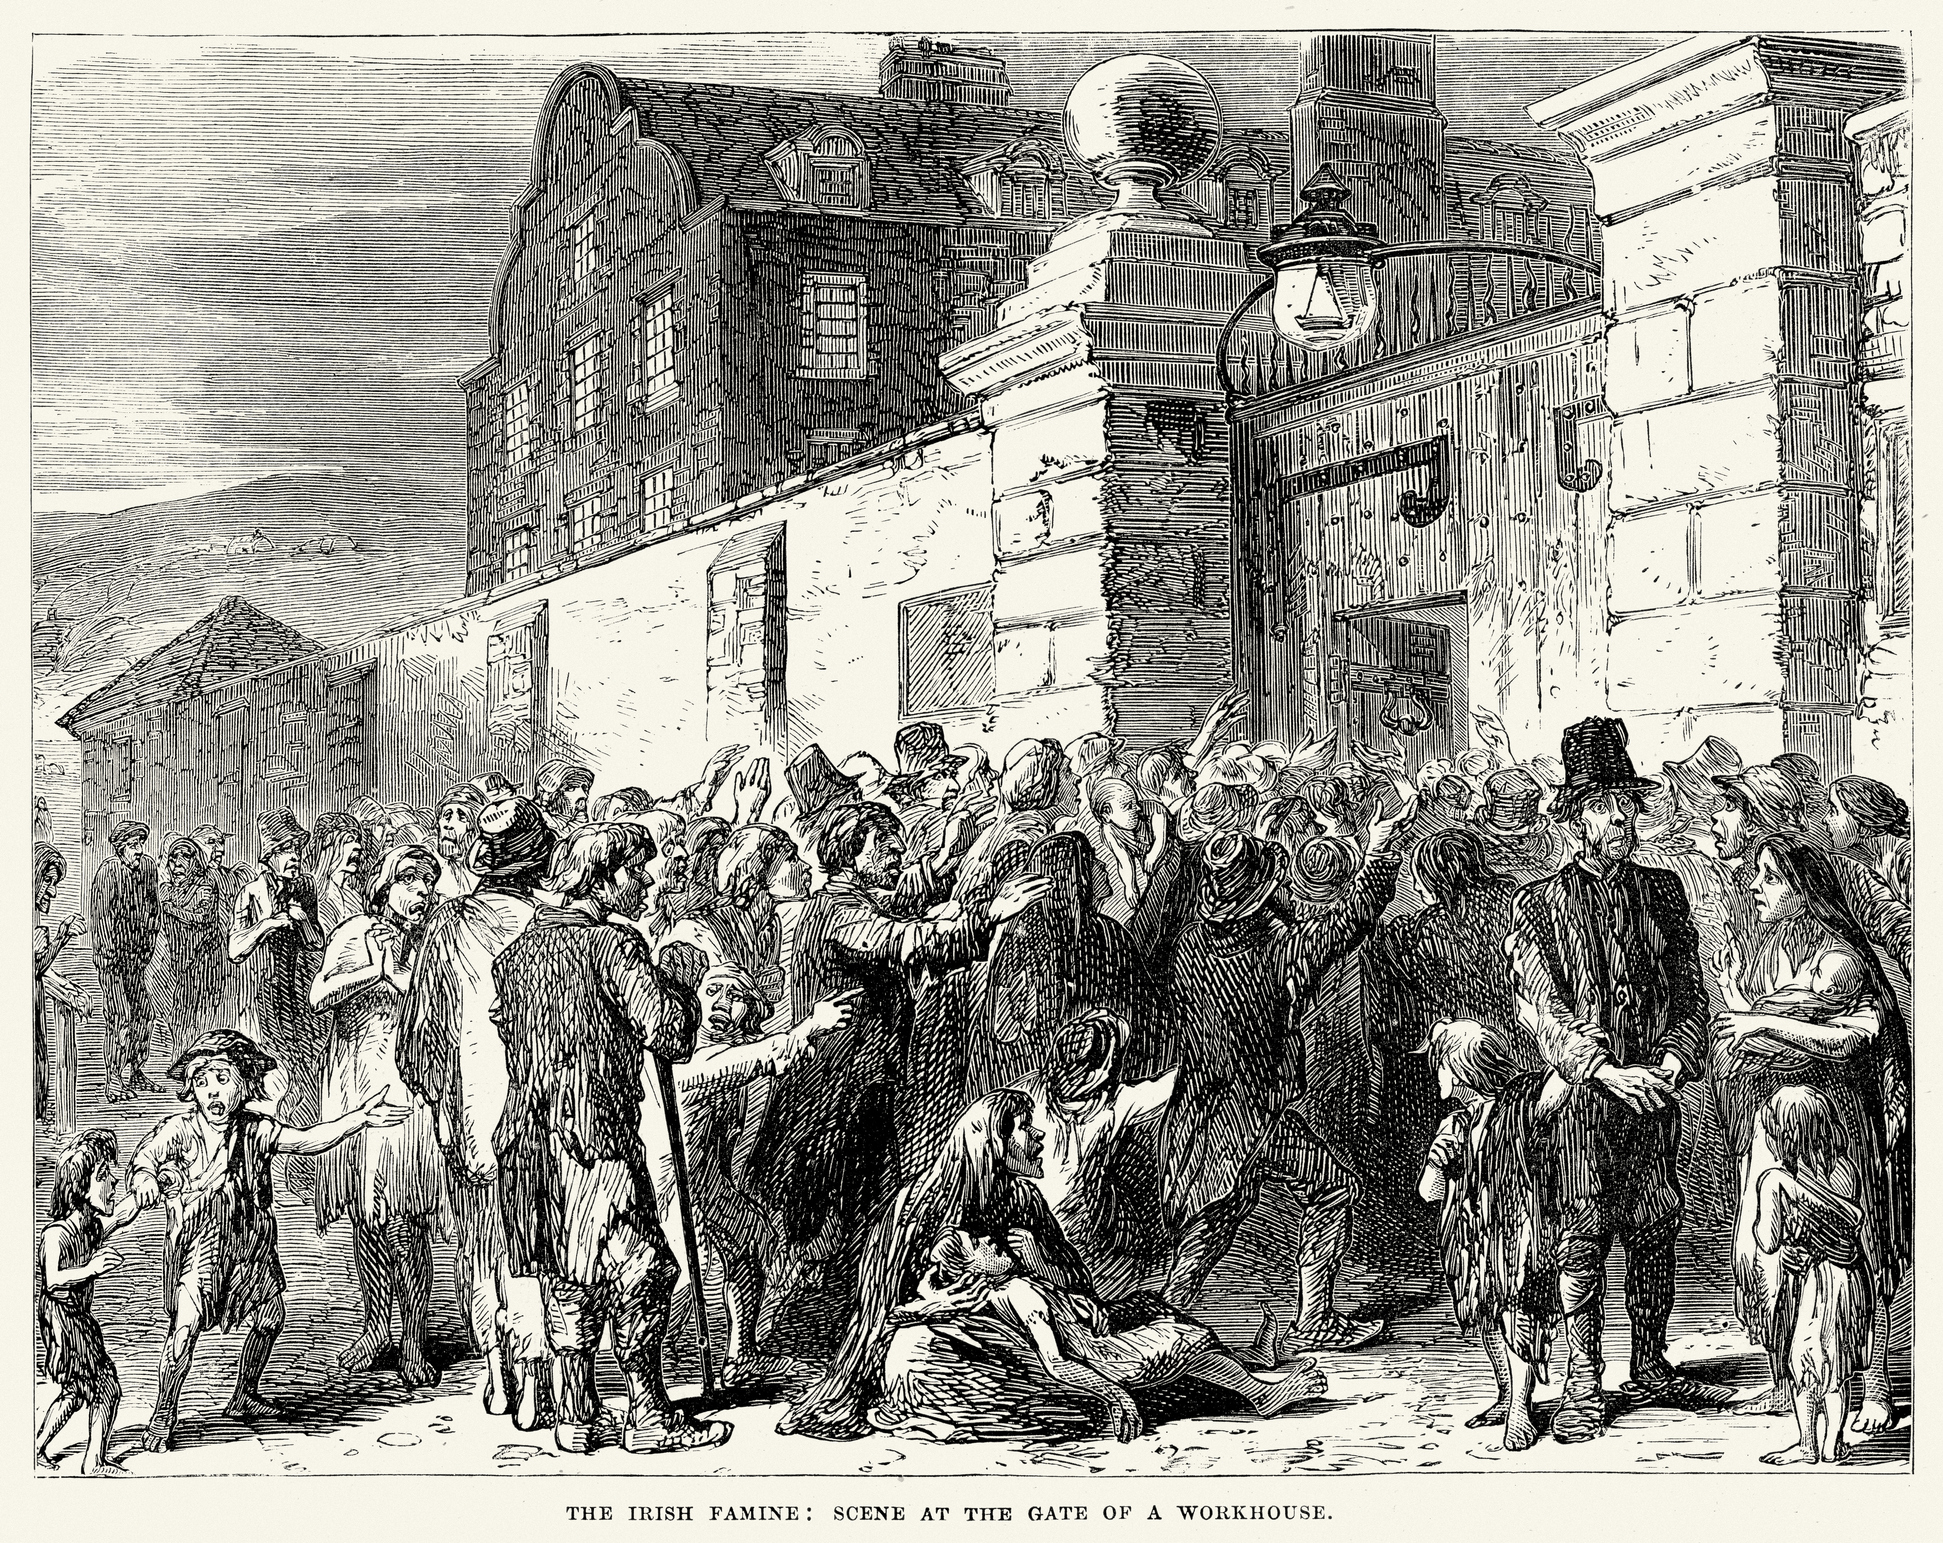 Black and white engraving of The Irish Famine, scene at the Gate of a Workhouse